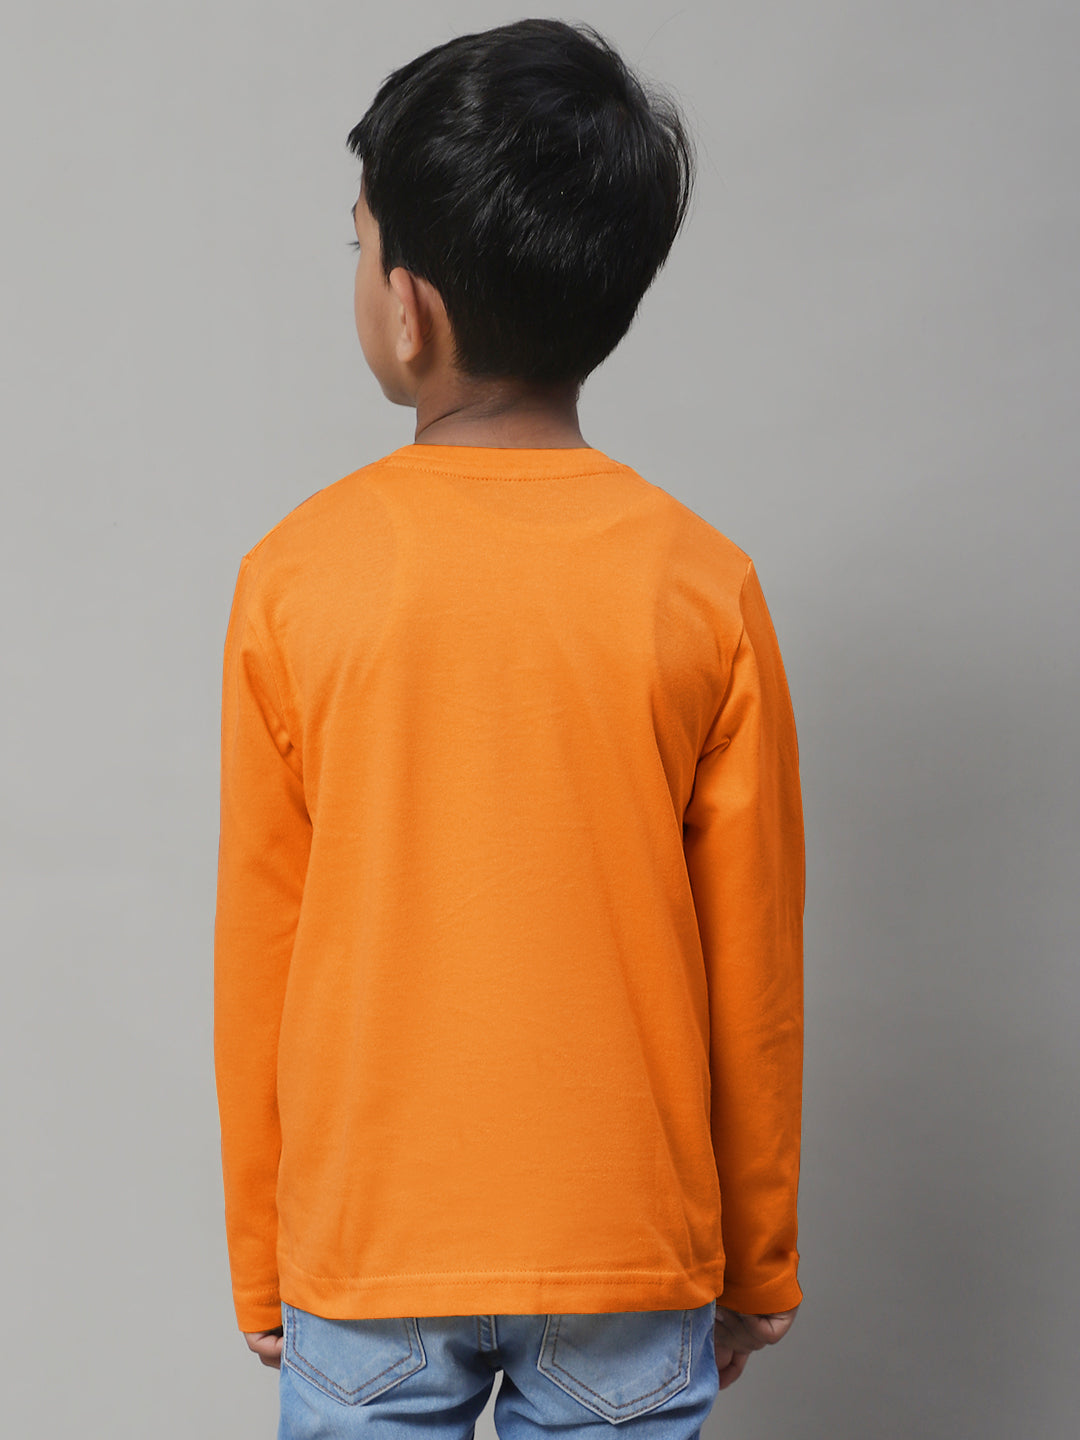 Classic Full Sleeves V-Neck Solid 2-7Y Kids T-Shirt - Friskers